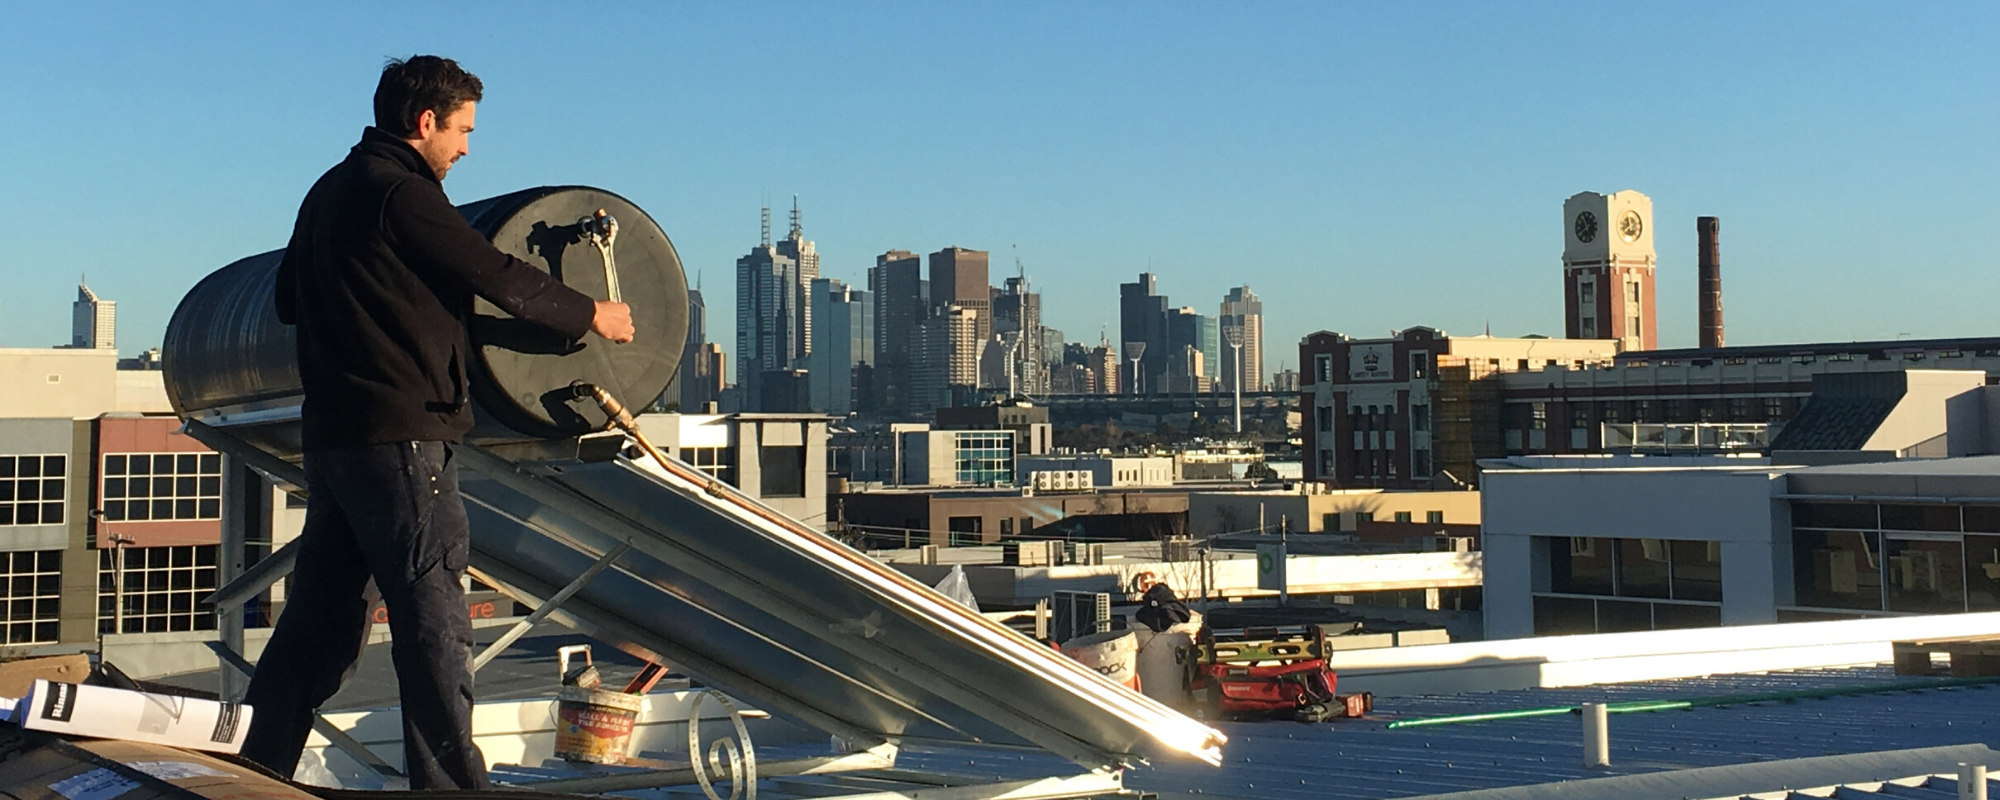 Plumber working on Solar Hot water unit on roof in front of Melbourne skyline